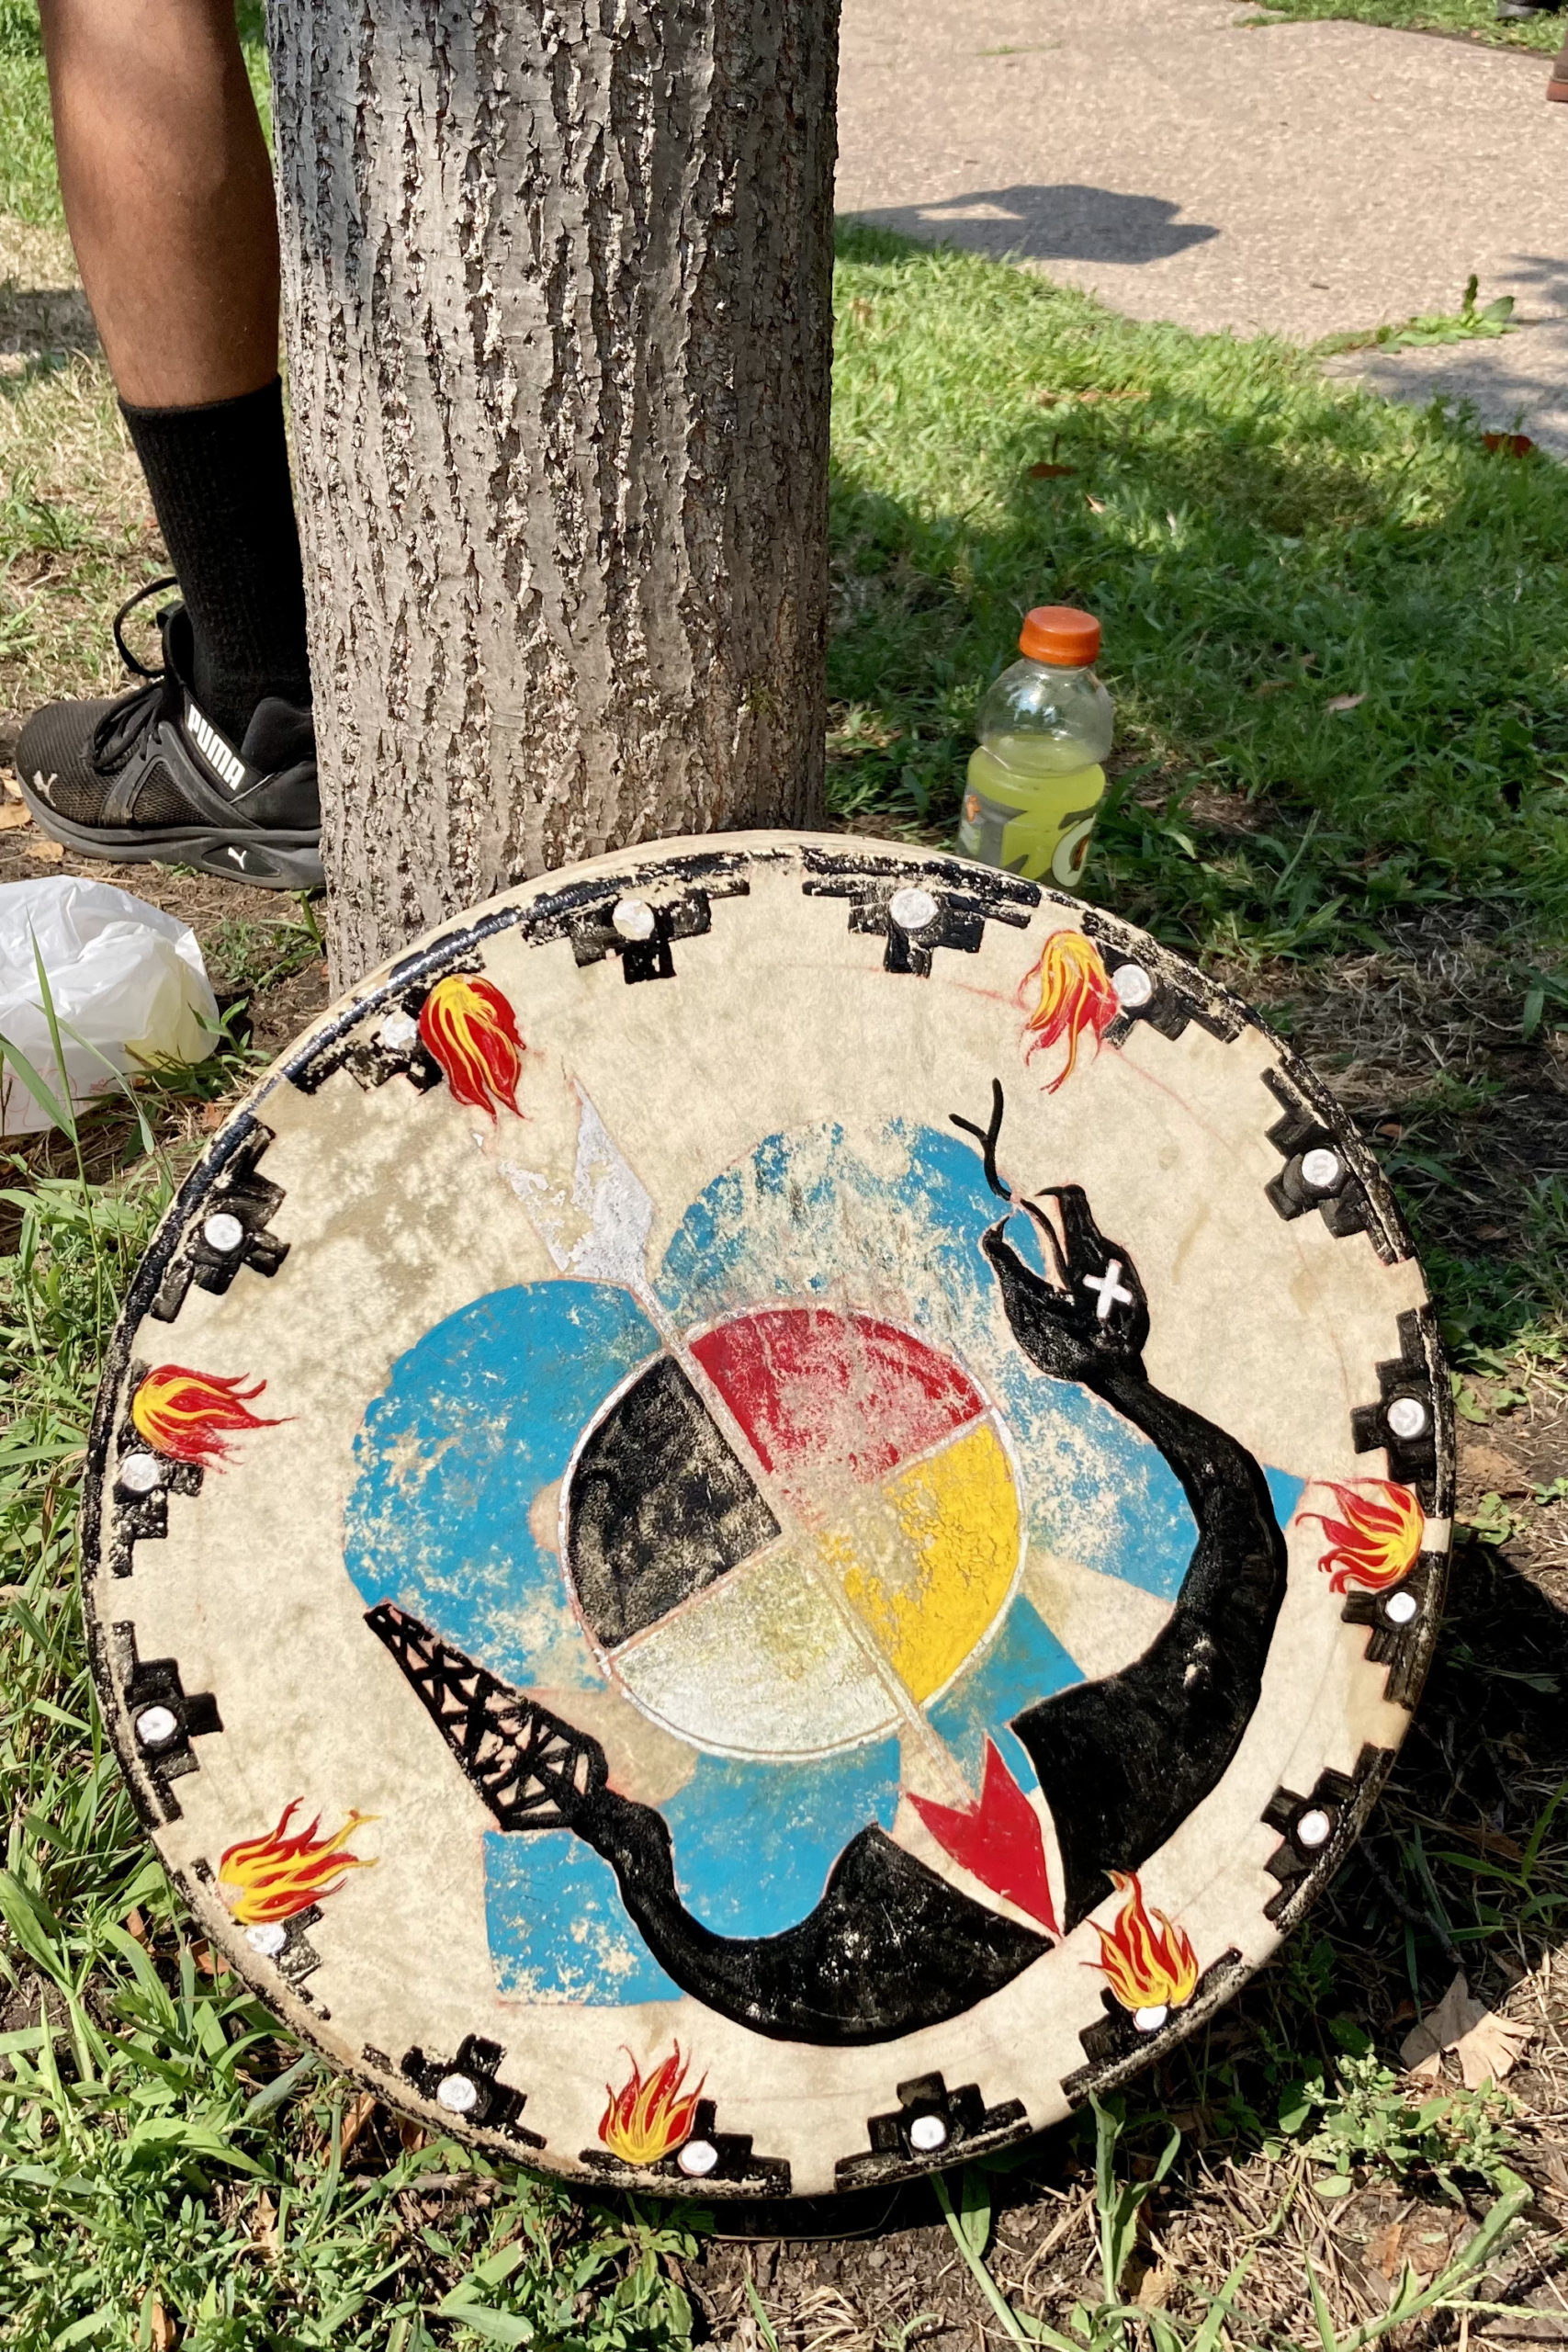 "Black Snake Killer" hand drum resting against a tree at the Martin Luther King Jr. Recreation Center in St. Paul MN at the end of the Treaty People Walk for Water. Dozens of walkers departed from Camp Firelight on August 7 and walked 259 miles to St. Paul, arriving on August 25, 2021. Walkers were joined by others at the recreation center for the final mile and a half walk to the State Capitol. They marched in silence in honor of the thousands of children's remains found in residential boarding schools over the summer, and for all the missing and murdered Indigenous relatives. https://www.stopline3.org/events/treatypeoplewalk